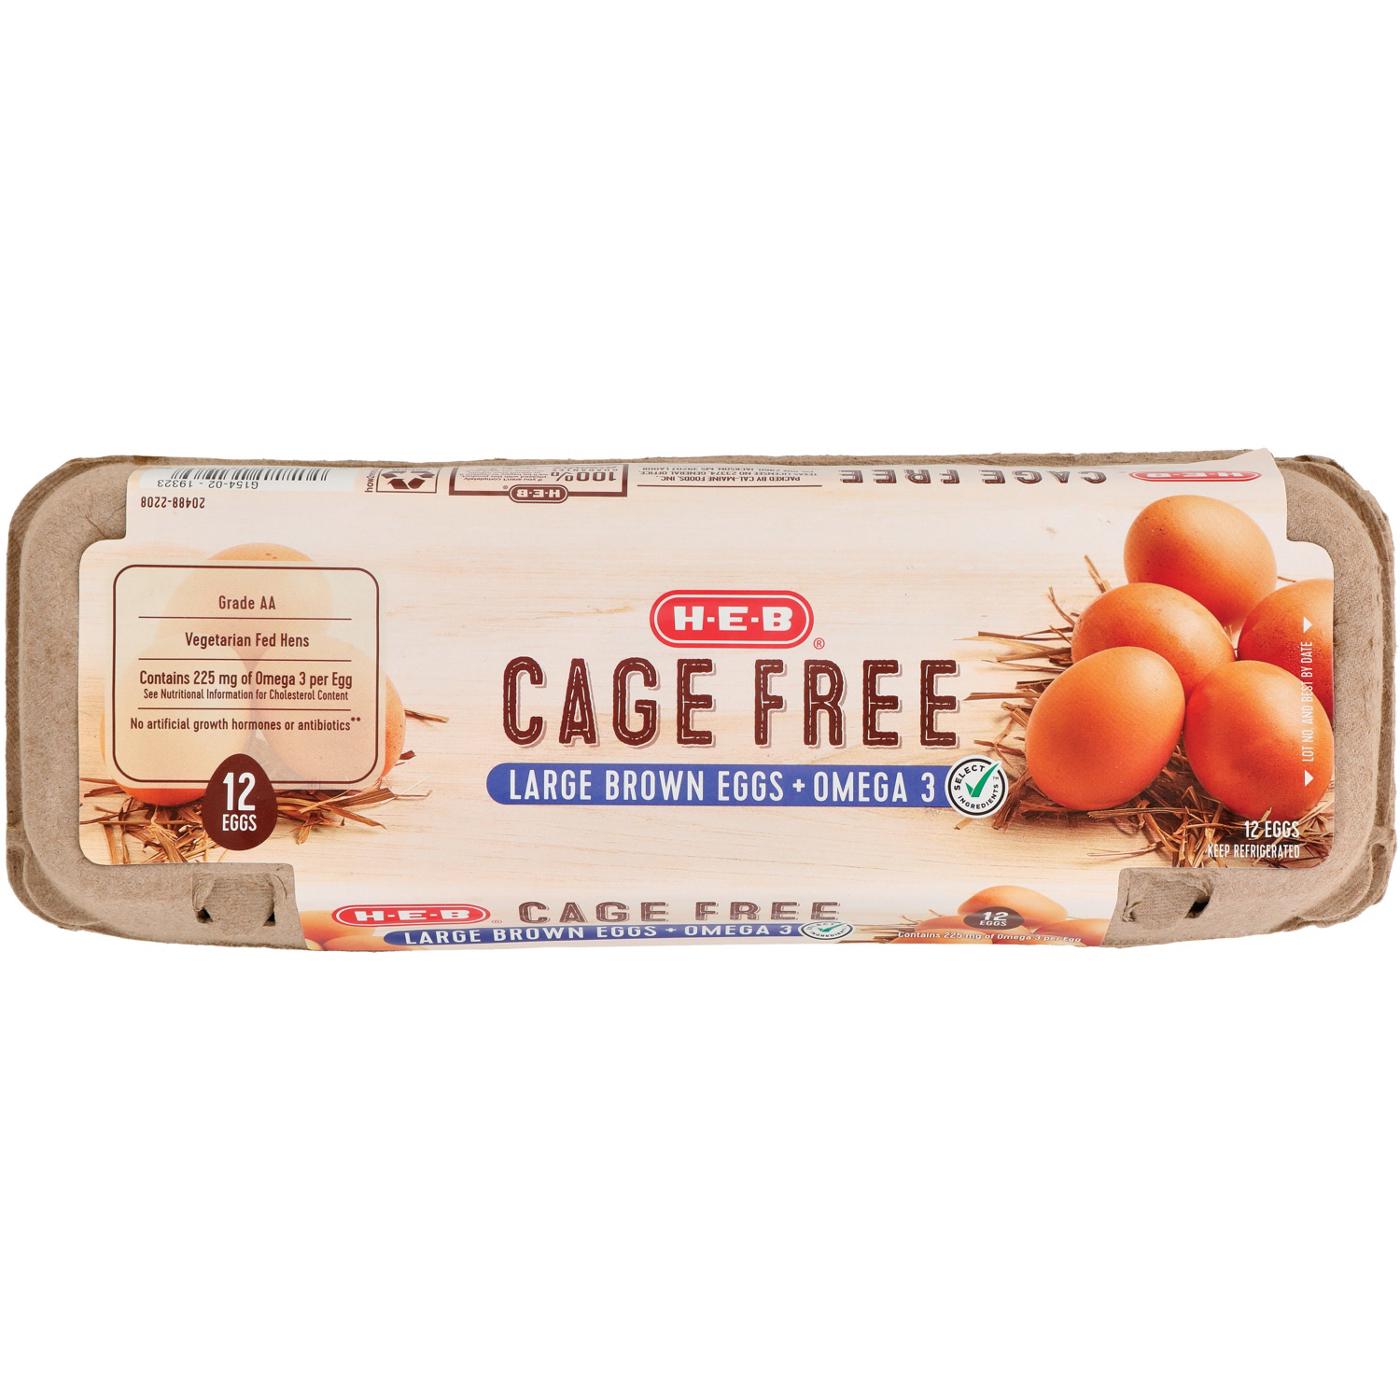 H-E-B Cage Free Omega-3 Grade AA Large Brown Eggs; image 2 of 3